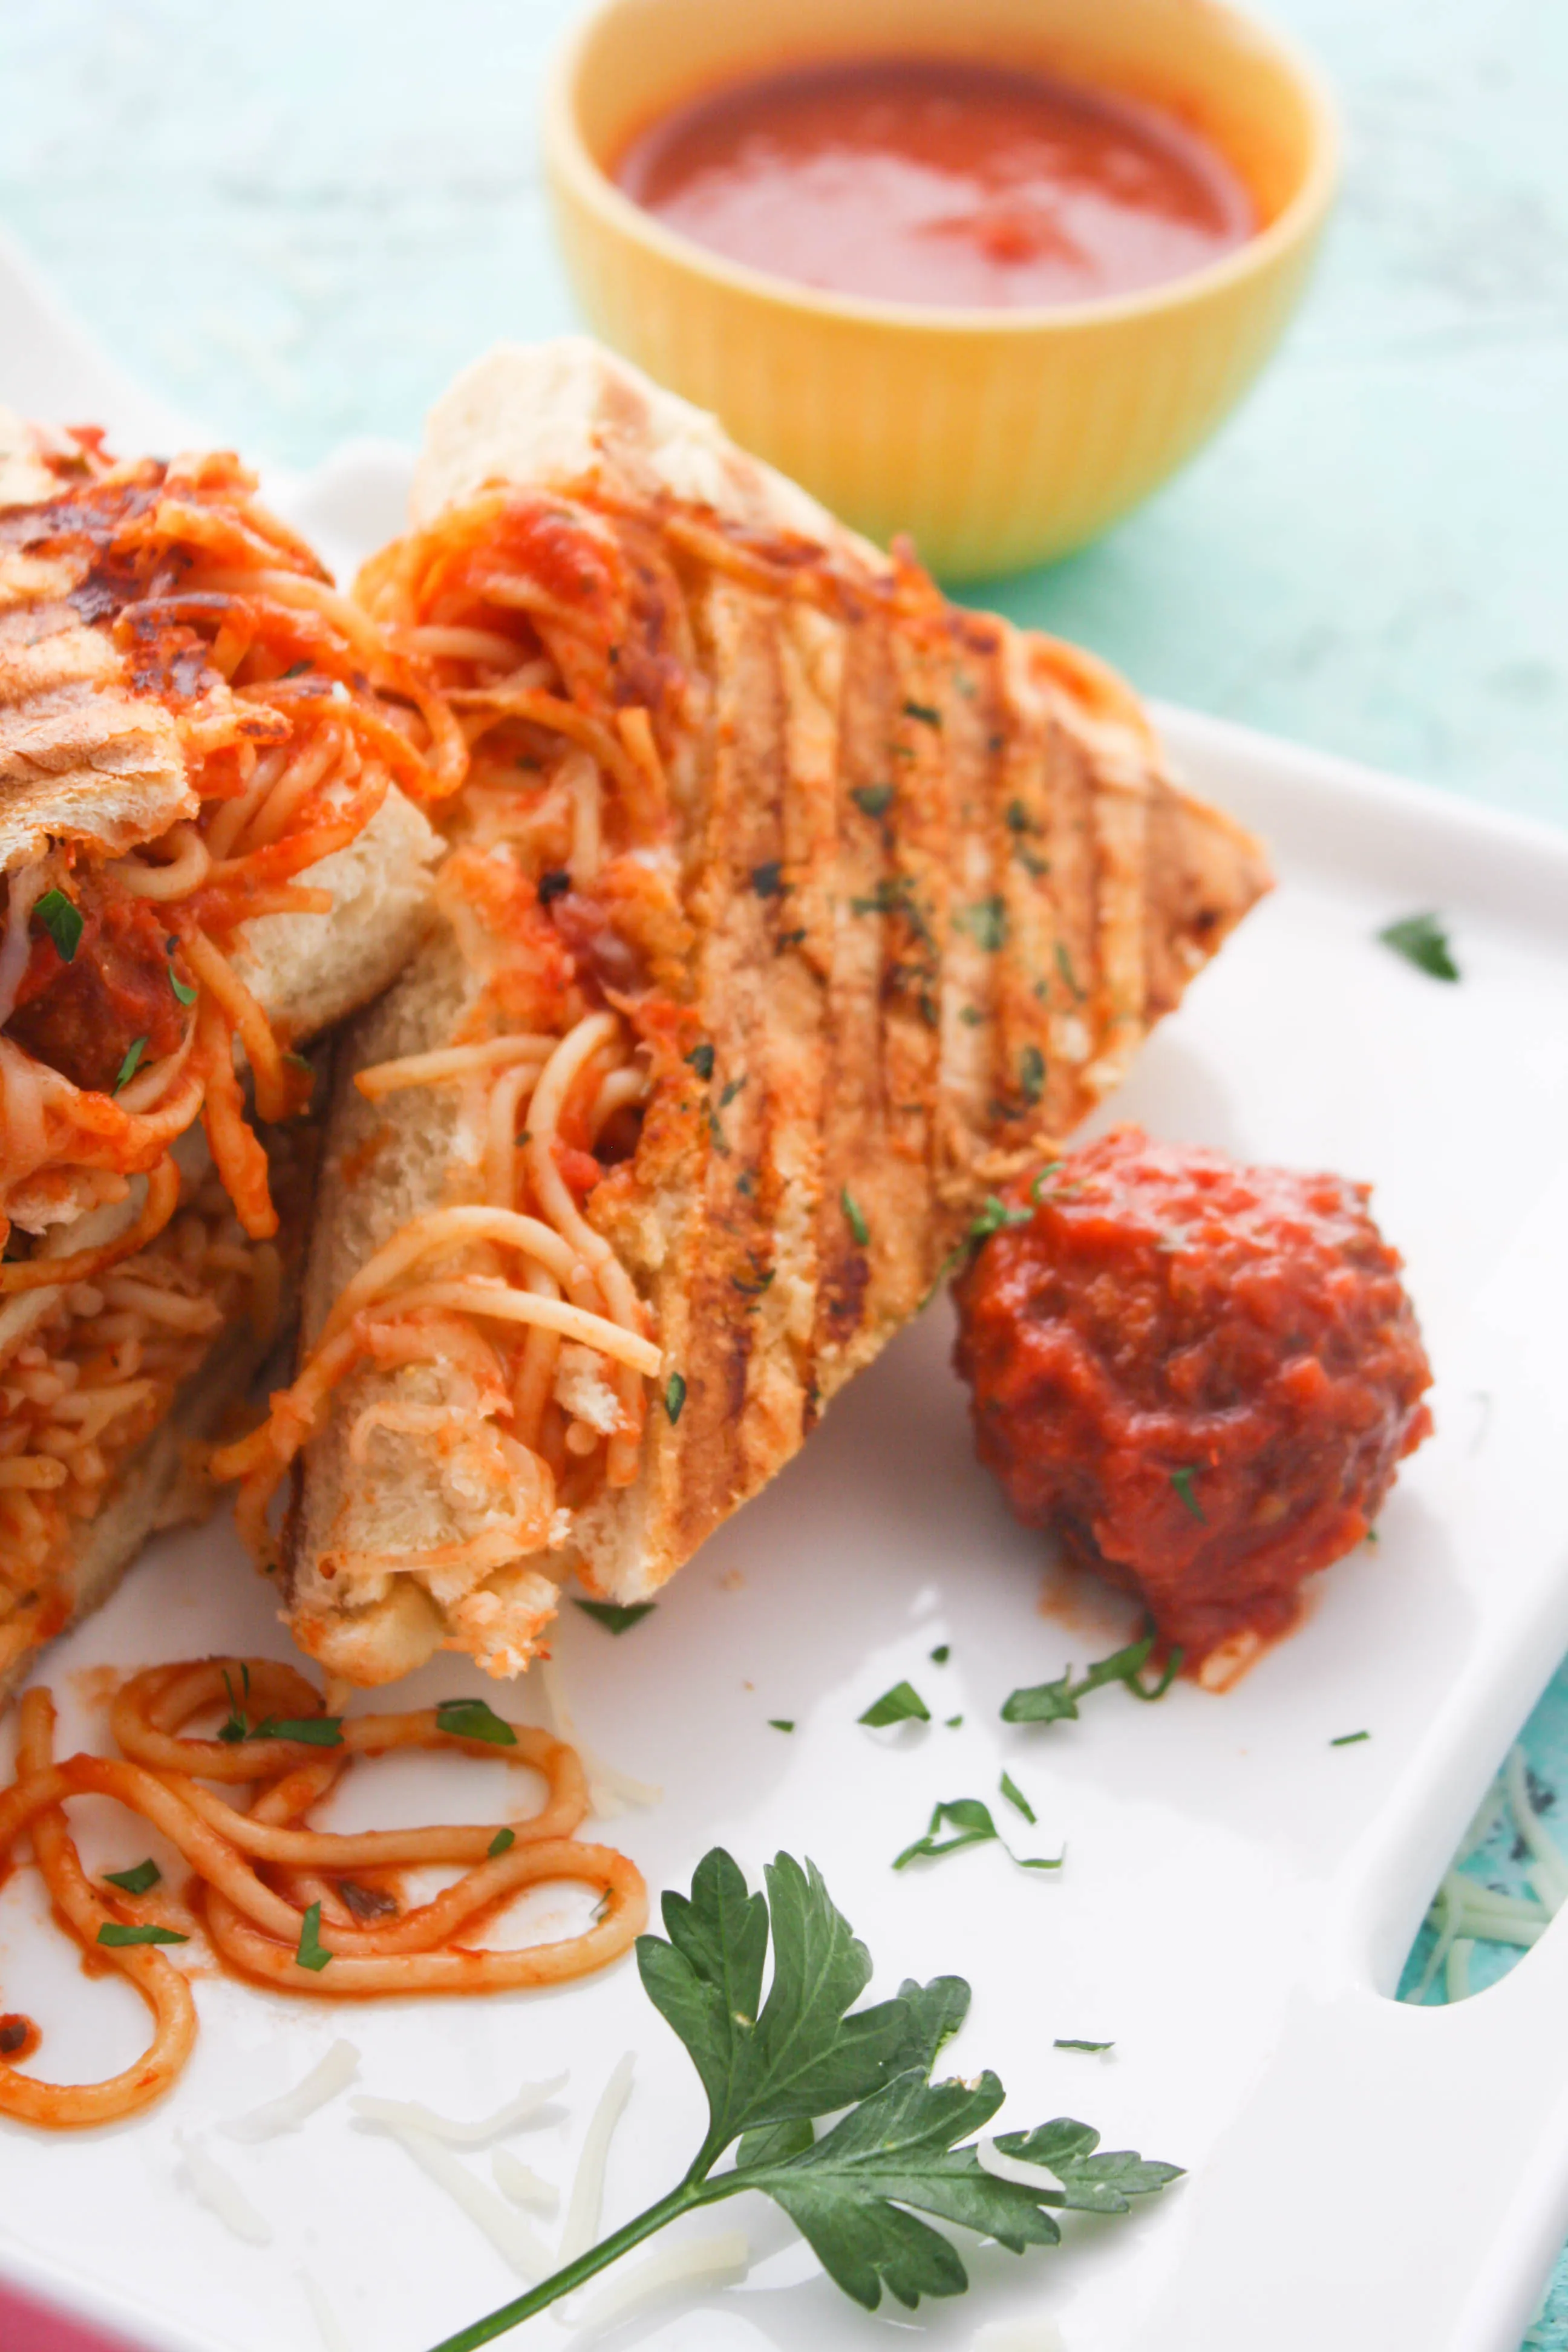 Leftover Spaghetti & Meatball Panini is a great dish to use up last night's meal! You'll love how fun this sandwich is!